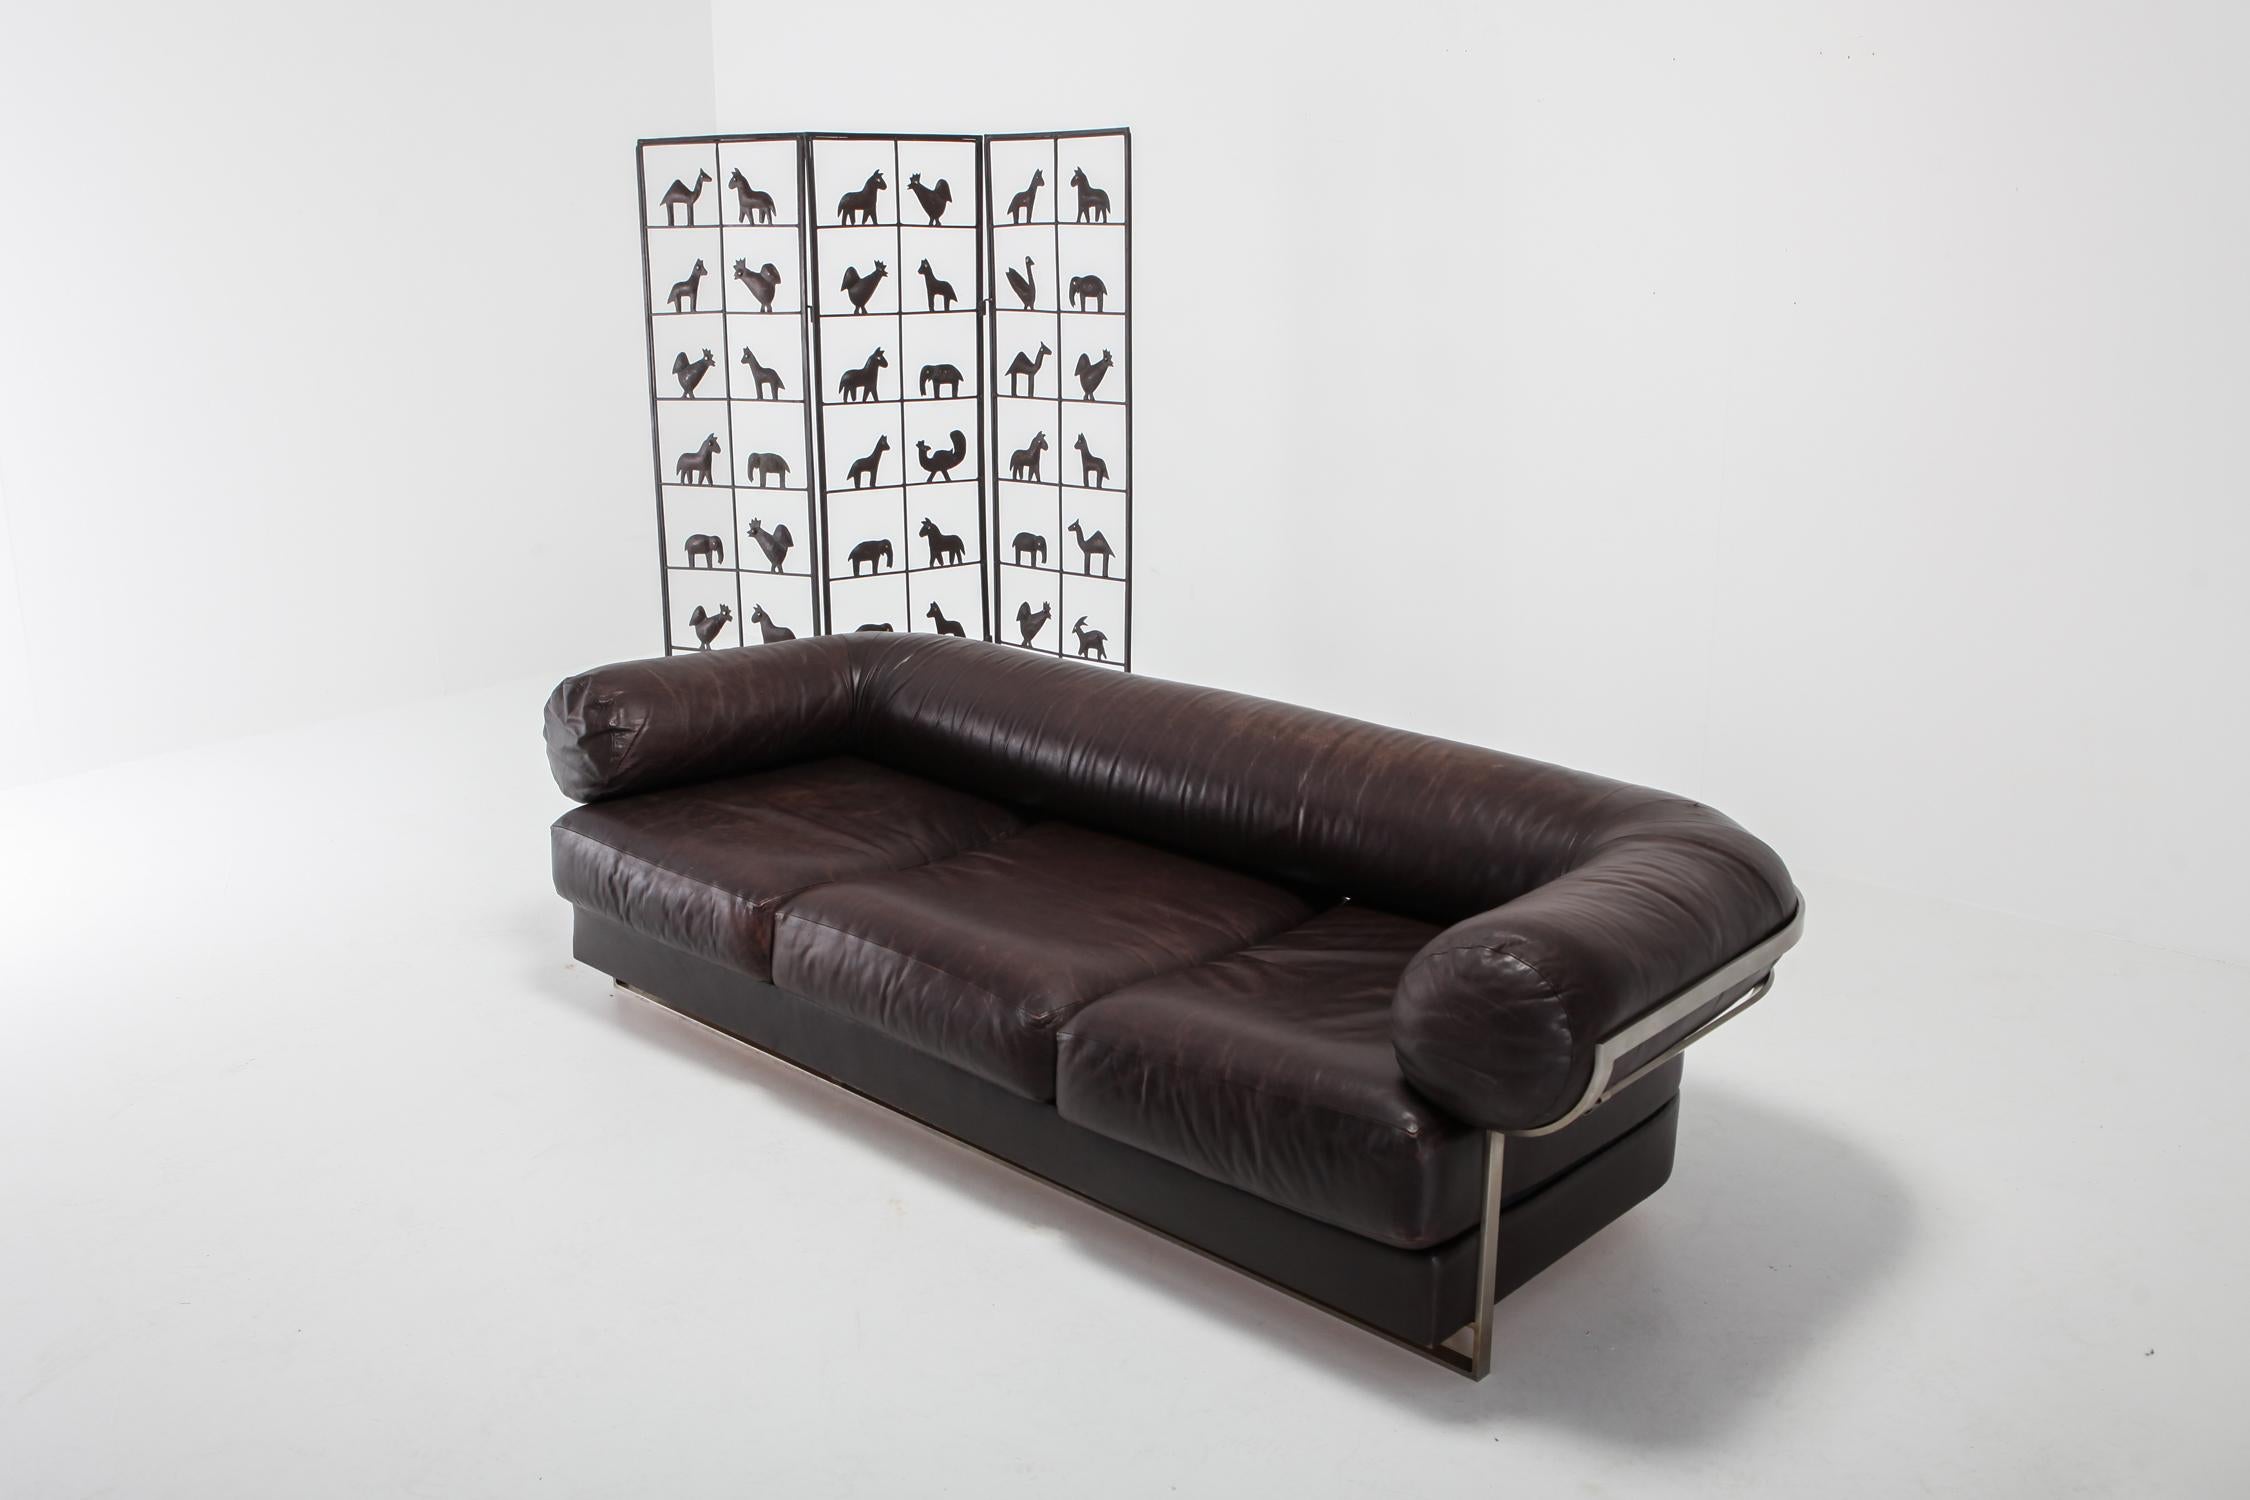 Post-Modern Jacques Charpentier Brown Leather 'Apollo' Sofa in Stainless Steel Frame